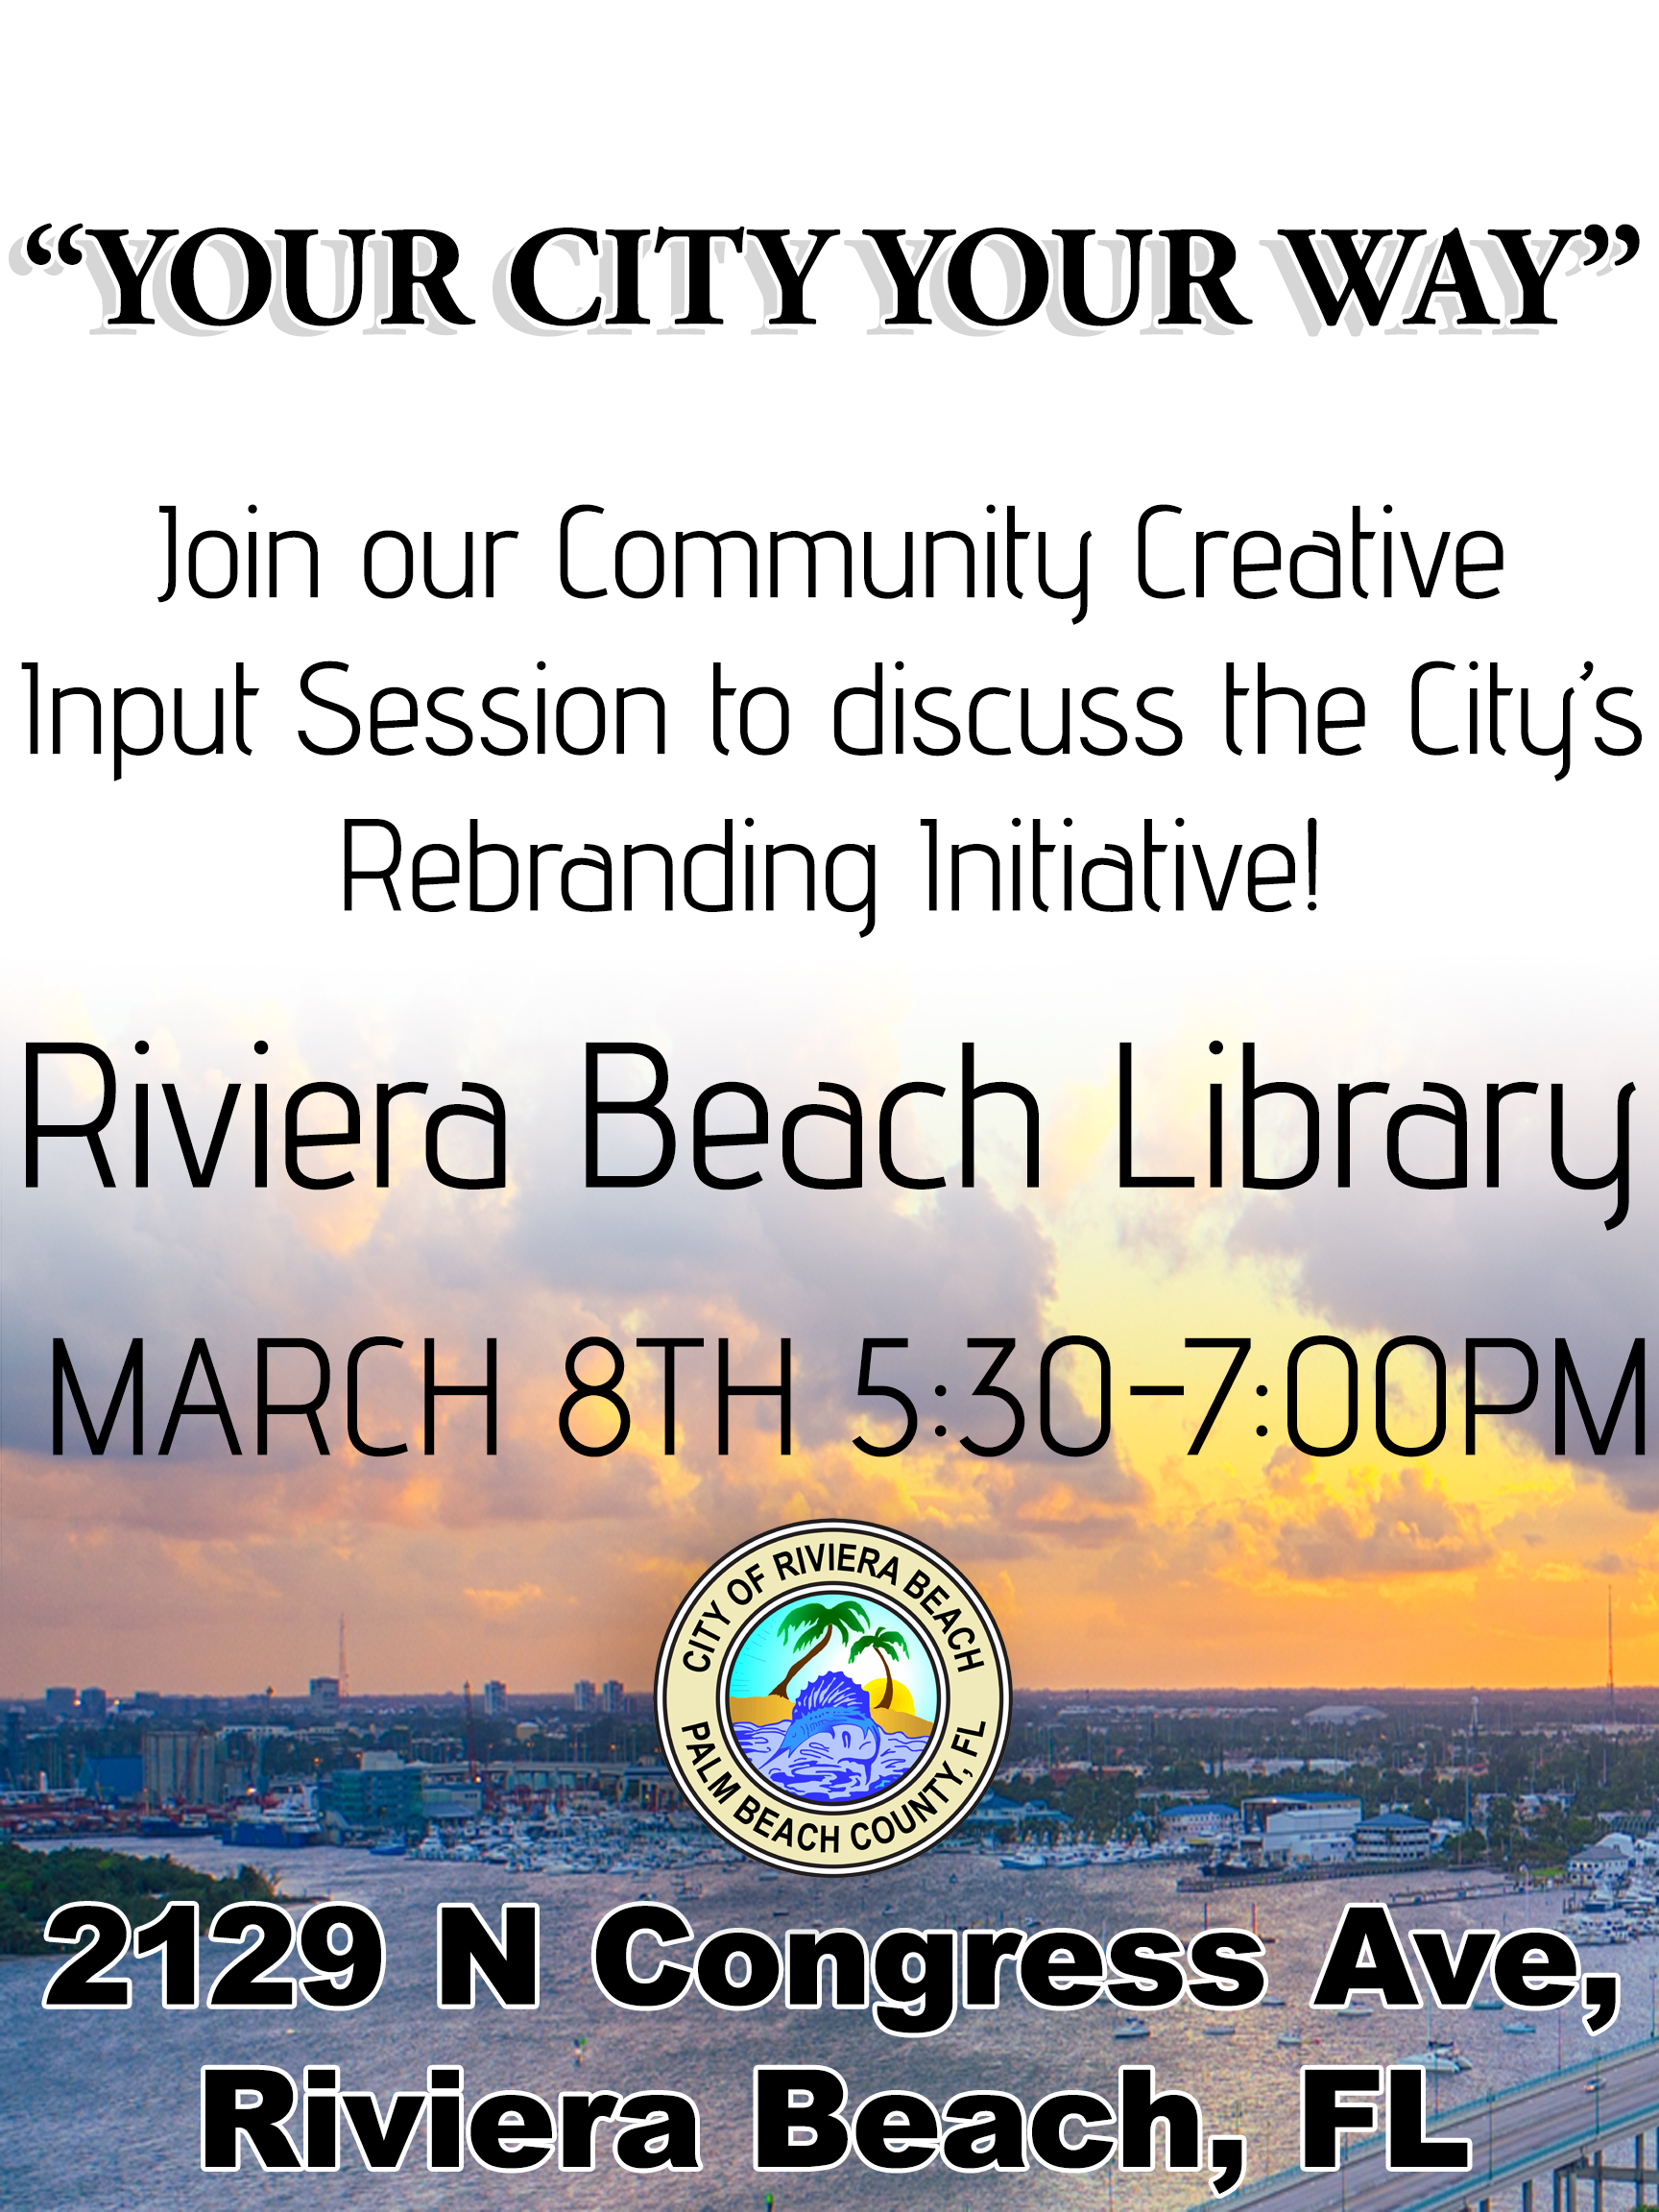 "ATTENTION RIVIERA BEACH" "The City of Riviera Beach will host a Community Meeting for gathering input regarding the city’s rebranding initiative. This meeting will take place on Wednesday, March 8th, 2023 at 5:30 pm at The Riviera Beach Public Library located at 2129 N Congress Avenue, Riviera Beach, FL 33404. Youth Empowerment Training Room. In accordance to Florida Statute 286.011, Public meetings and records; public inspection; criminal and civil penalties.— (1)    All meetings of any board or commission of any state agency or authority or of any agency or authority of any county, municipal corporation, or political subdivision, except as otherwise provided in the Constitution, including meetings with or attended by any person elected to such board or commission, but who has not yet taken office, at which official acts are to be taken are declared to be public meetings open to the public at all times, and no resolution, rule, or formal action  shall  be  considered  binding  except  as  taken  or  made  at  such  meeting.  The  board  or commission must provide reasonable notice of all such meetings. Additional Information is available at:http://www.leg.state.fl.us/Statutes/index.cfm?App_mode=Display_Statute&URL=0200- 0299/0286/Sections/0286.011.html" "PLEASE  TAKE  NOTICE  AND  BE  ADVISED,  that  if  any  interested  person  desires  to  appeal  any decision  made  by  the  City  Council  with  respect  to  any  matter  considered  at  this  hearing,  such interested person, at own expense, will need a record of the proceedings, and for such purpose may need  to  ensure  that  a  verbatim  record  of  the  proceedings  is  made,  which  record  includes  the testimony and evidence upon which the appeal is to be based, pursuant to F.S. 286.0105. In   accordance   with   the   Americans   with   Disabilities   Act   of   1990,   persons   needing   special accommodations to participate in the proceedings should contact the Office of the City Manager at 561-812-6590  no  later than  48  hours  prior  to  the  proceedings.   If  hearing  impaired, telephone the Florida Relay Services 1-800-955-8771 (TDD) or 1-800-955-8770 (Voice) for assistance. Please govern yourselves accordingly. Mrs. Tawanna Smith 3/1/2023 Tawanna Smith Interim City Clerk" "Published on Wednesday, March 1, 2023 at 2:00 PM"